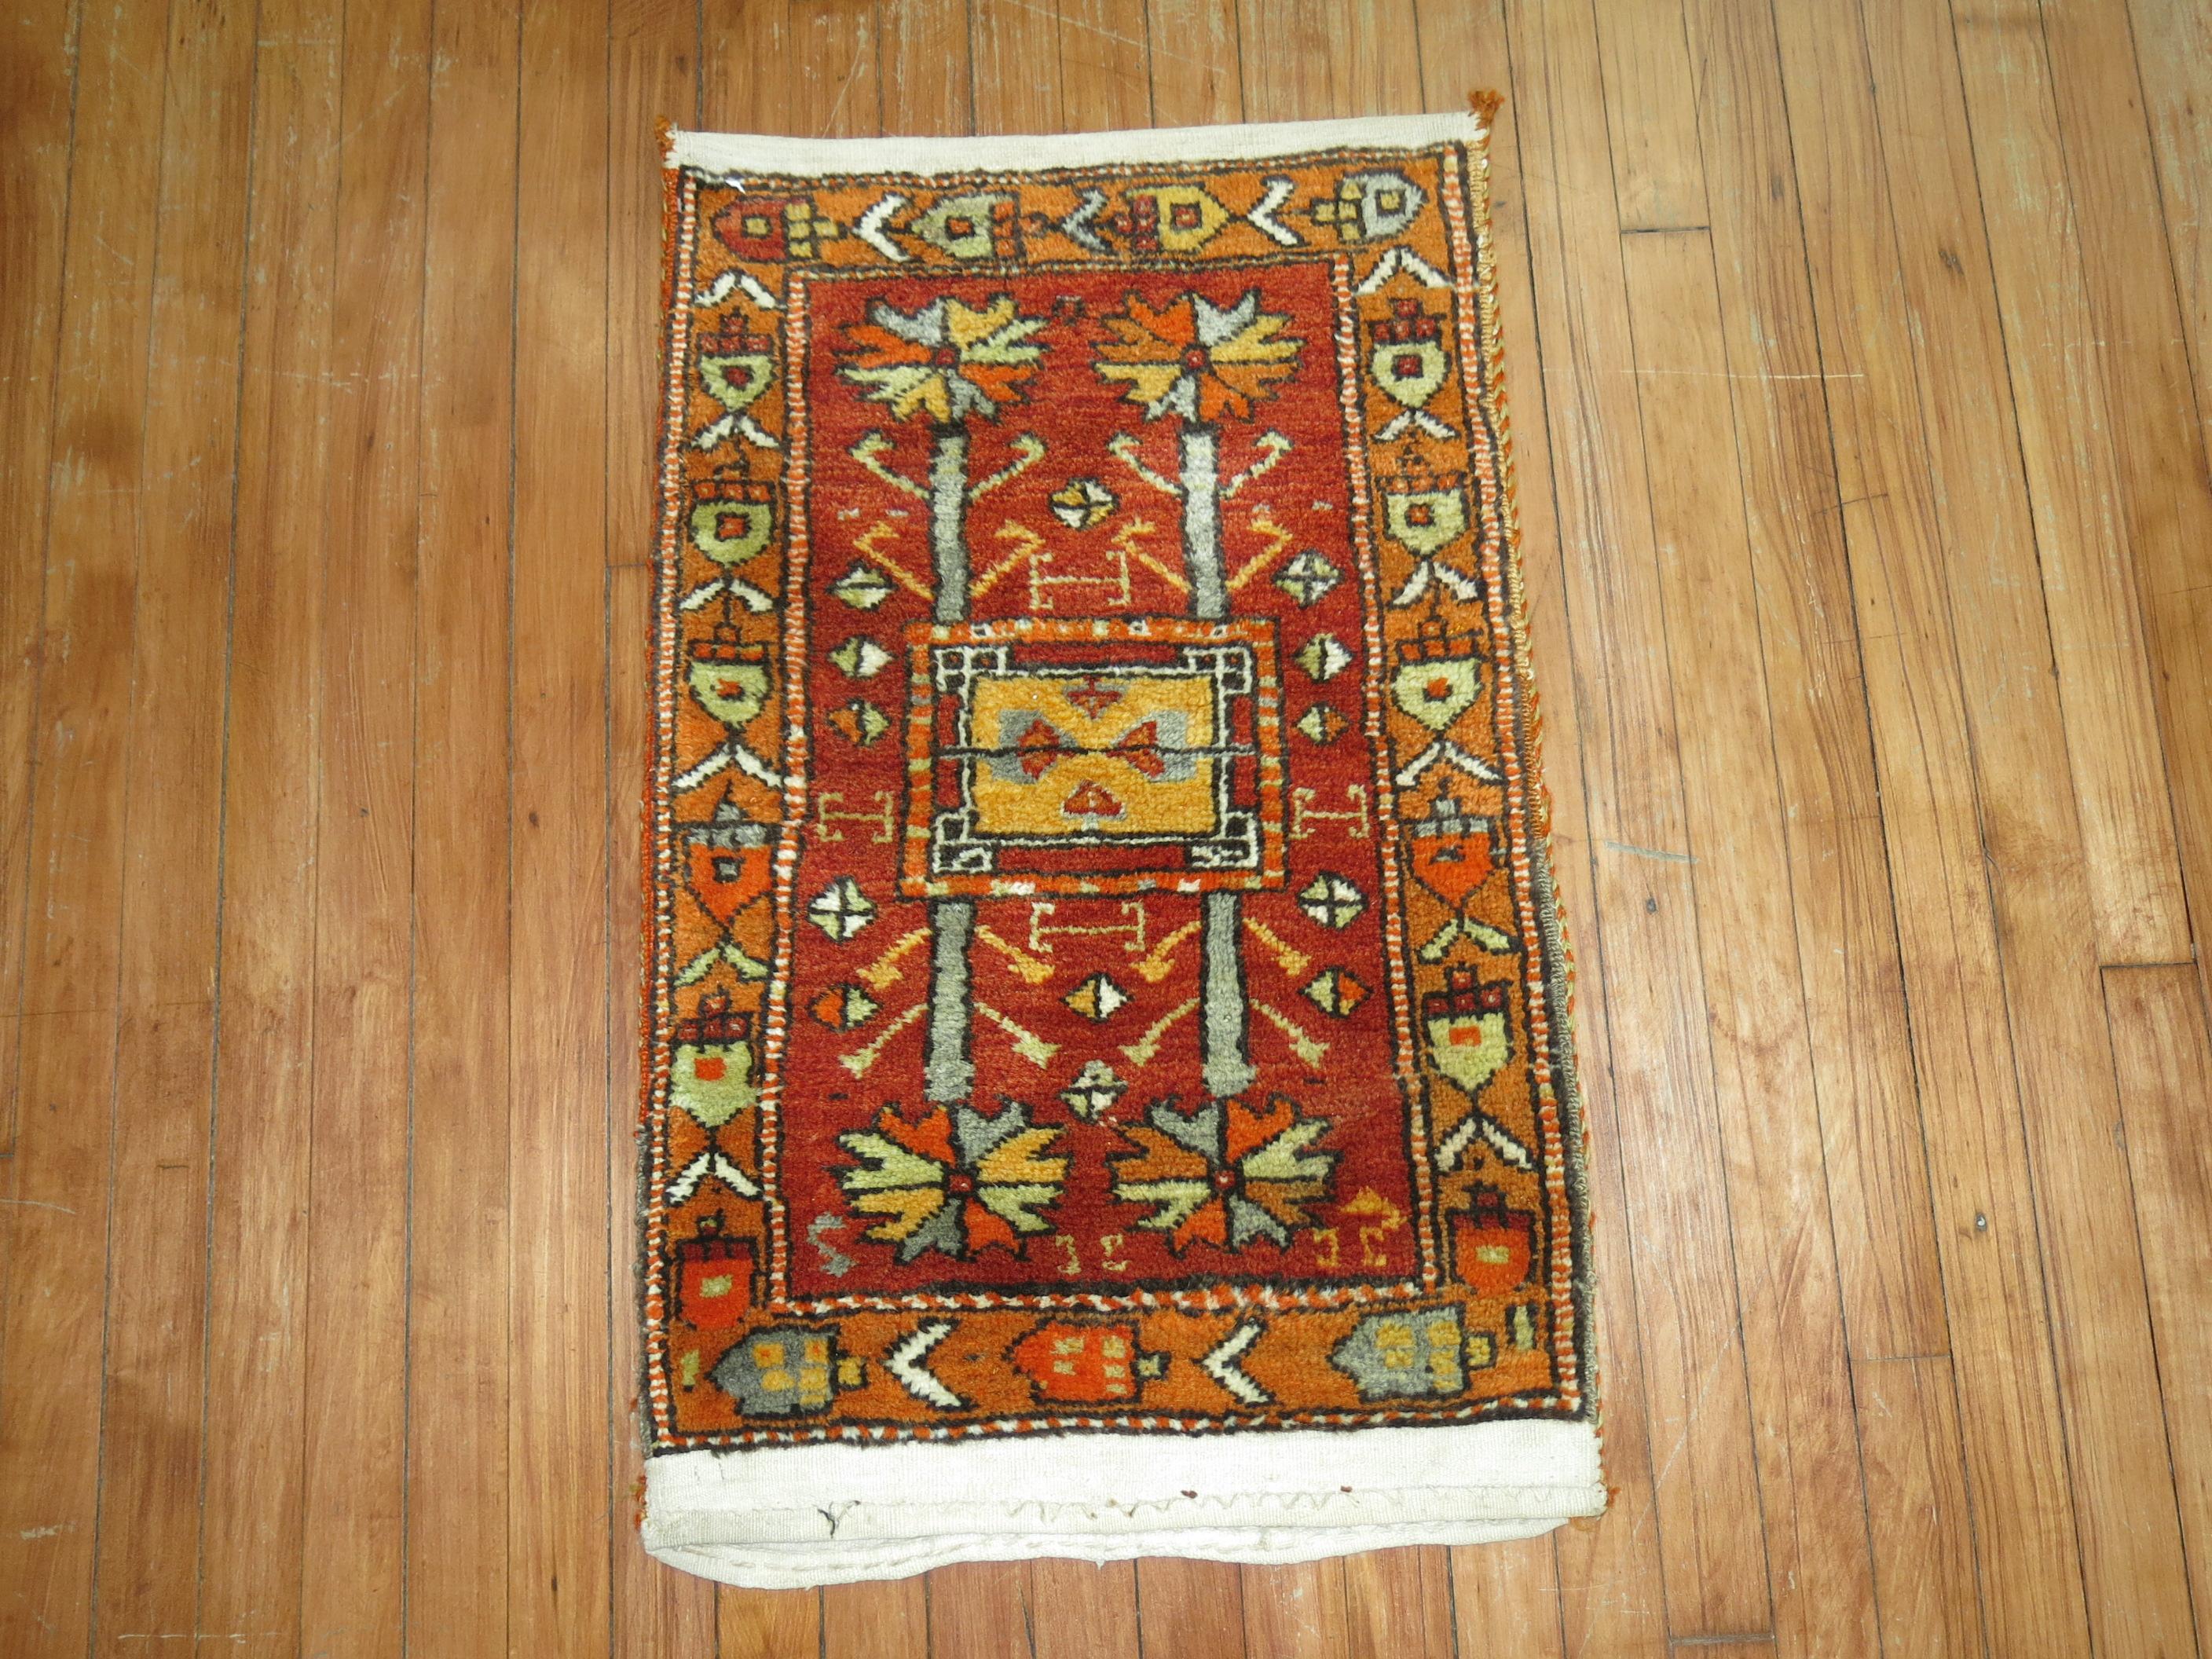 Bright Turkish Anatolian rug in vivid reds and orange accents

Measures: 1'9